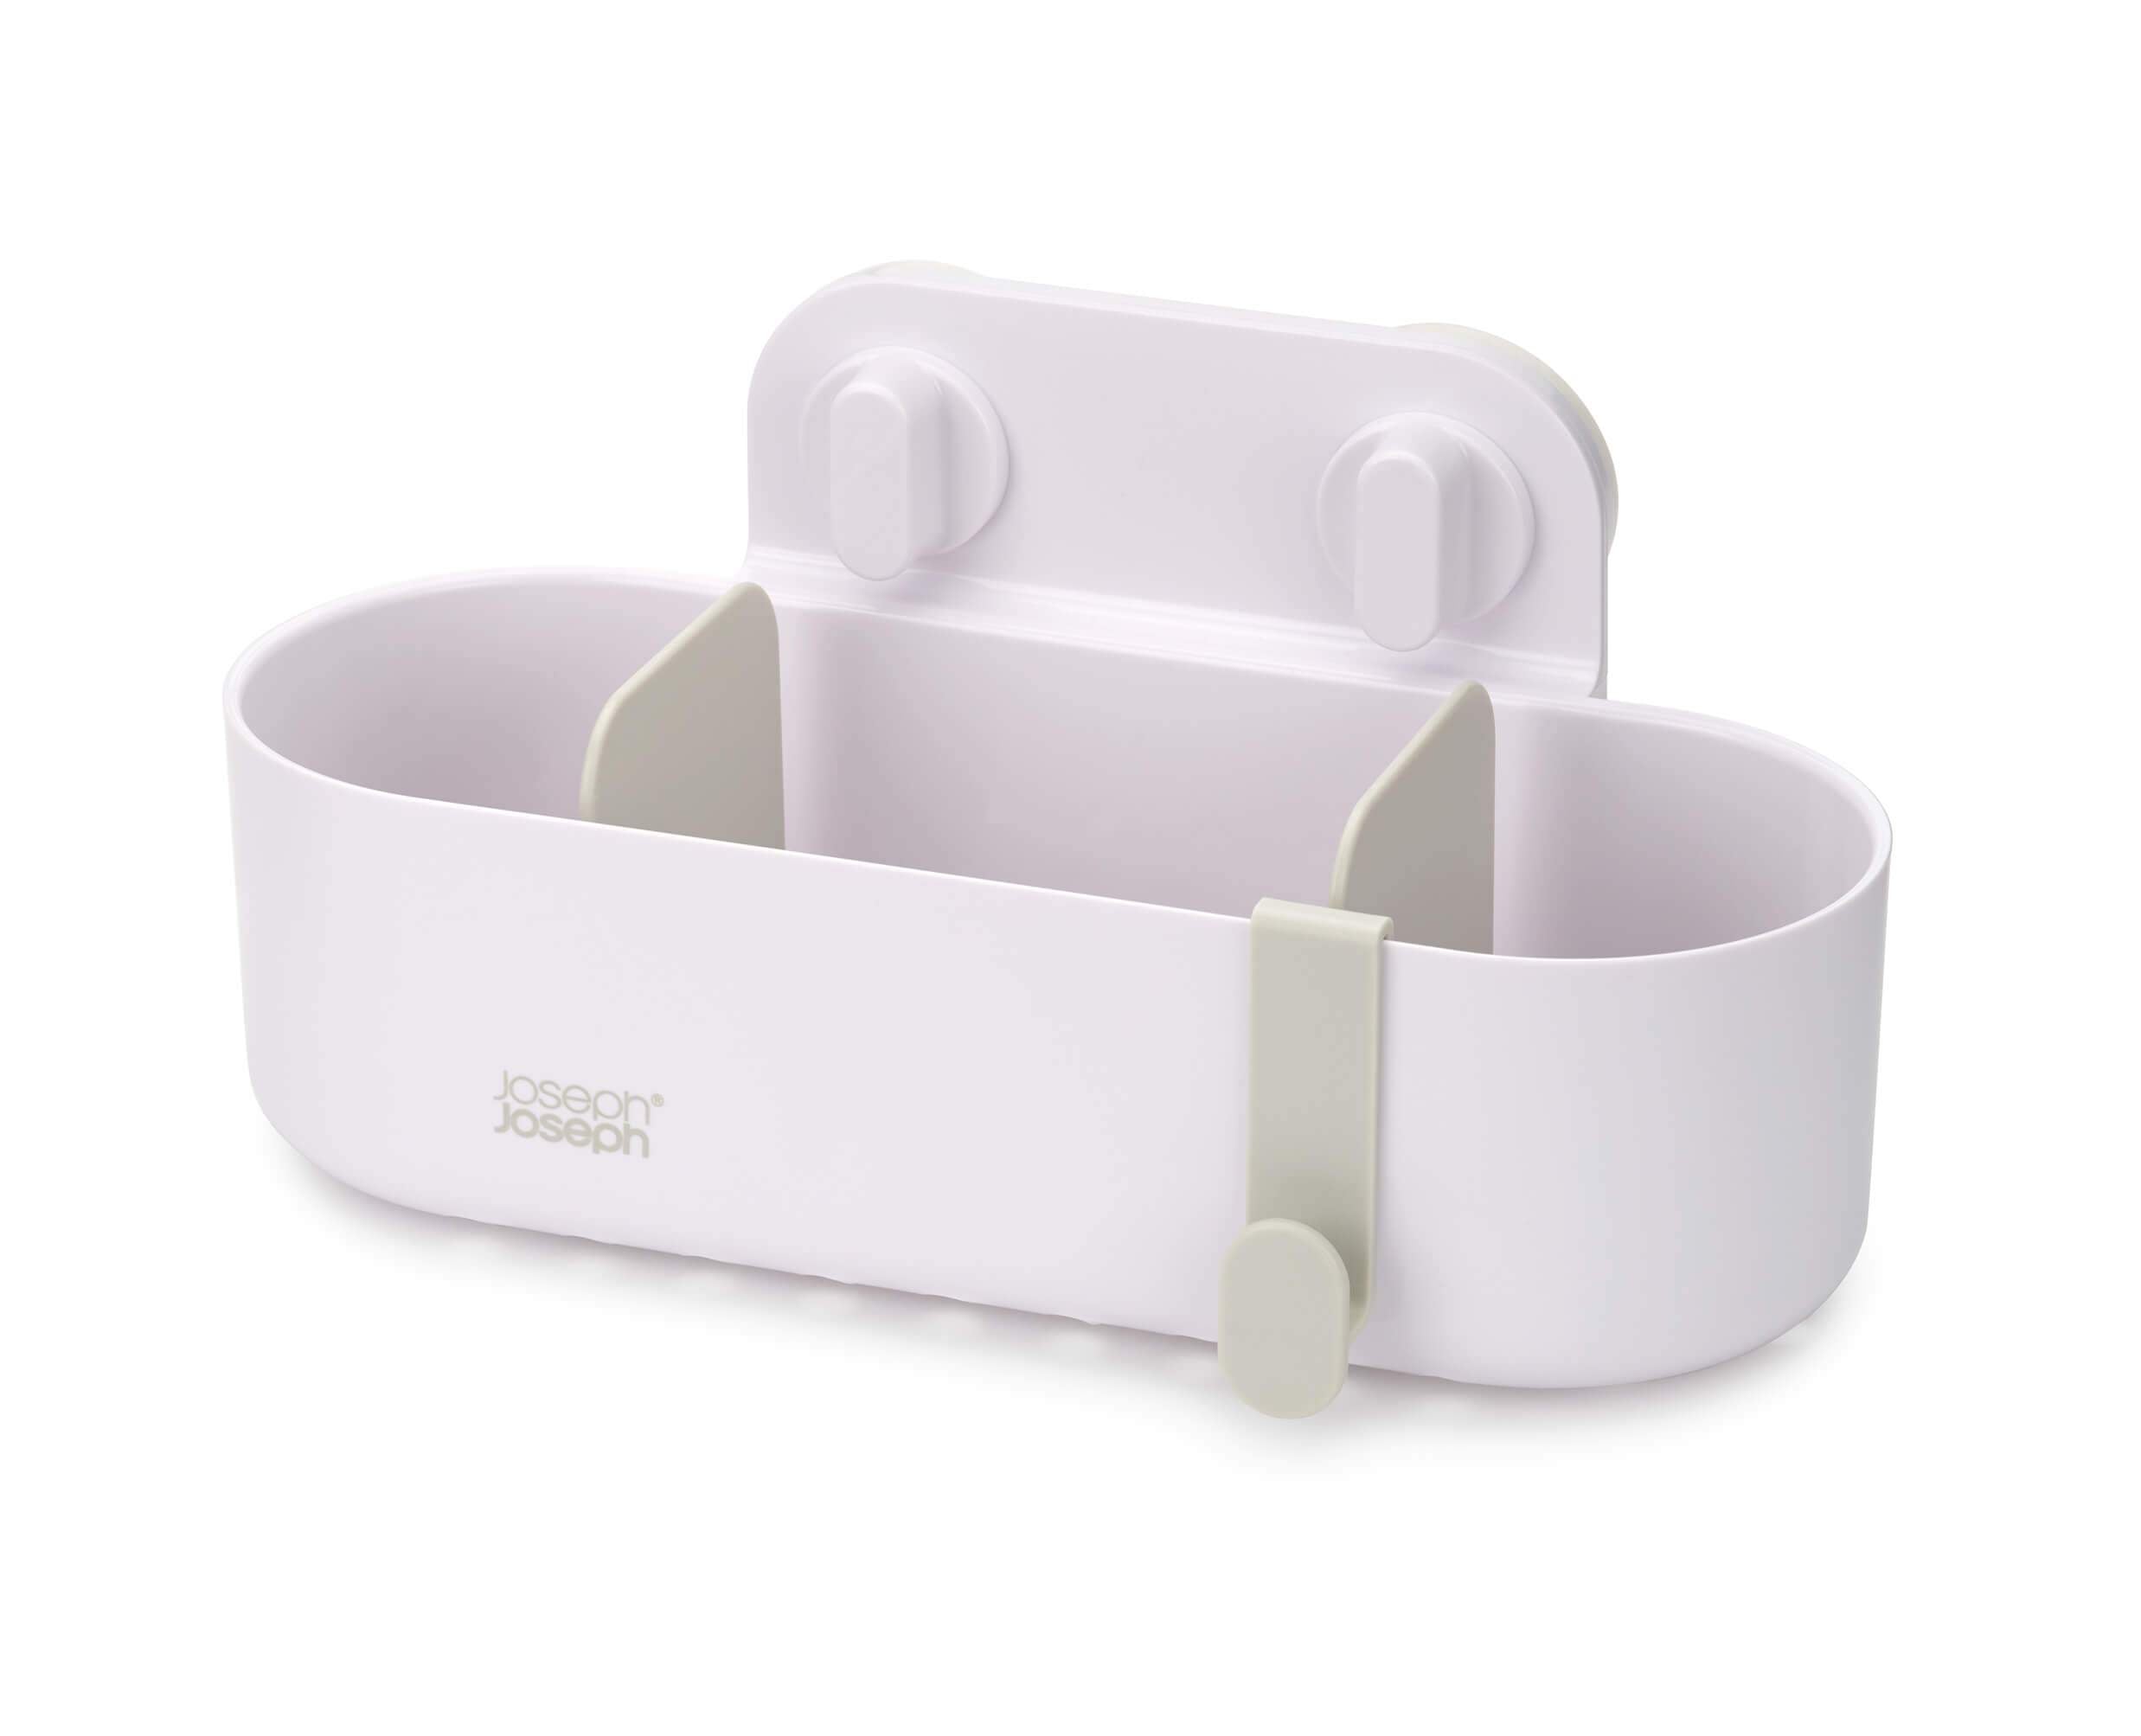 Duo Shower Caddy - image 2 - white background